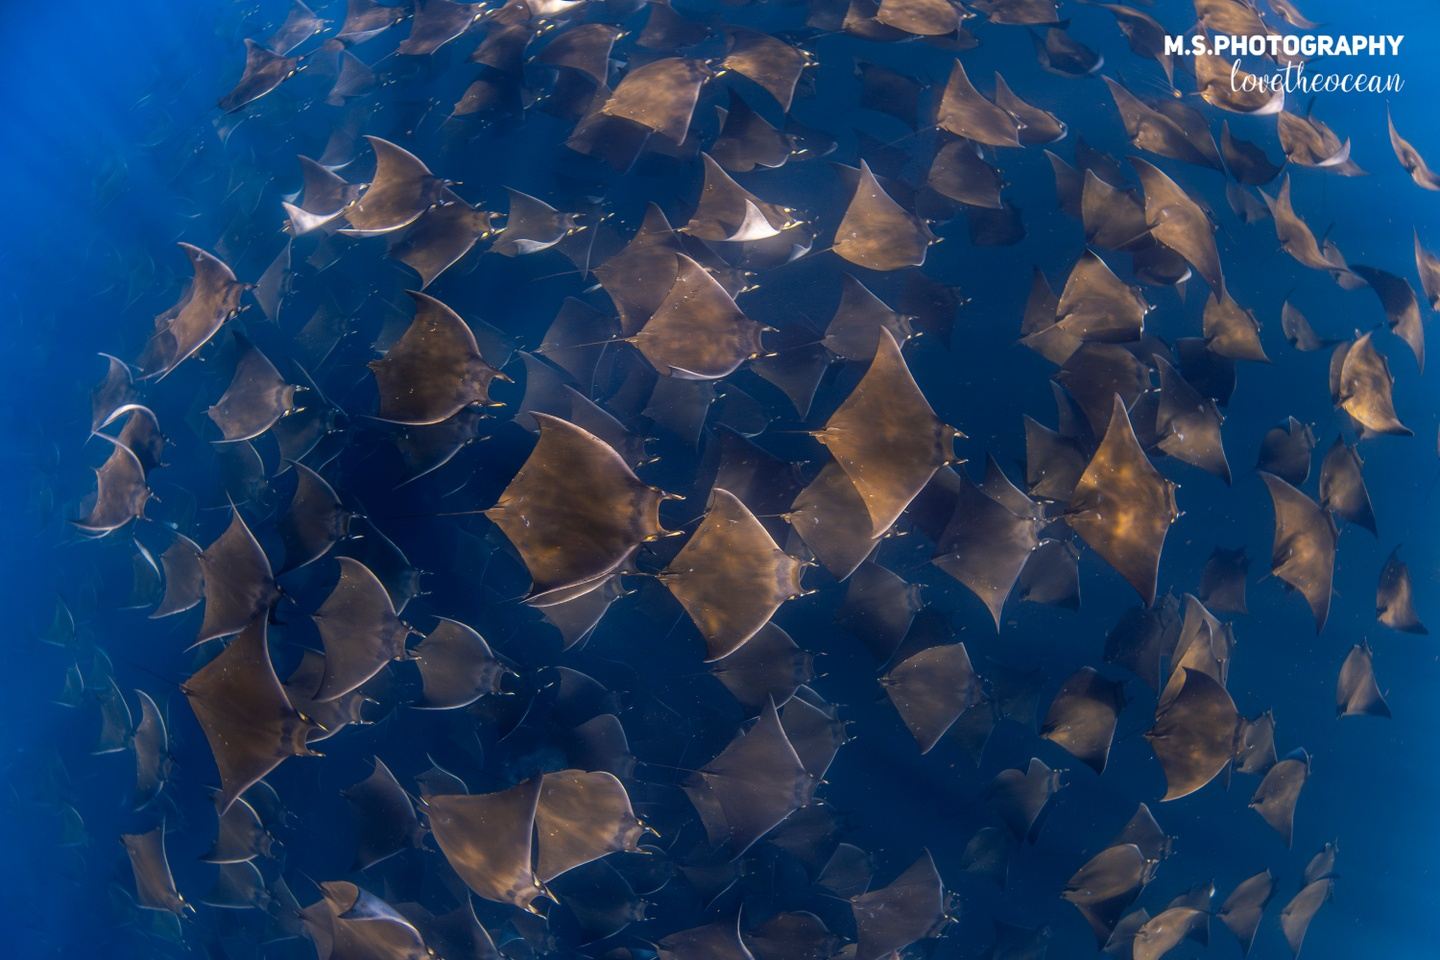 Mobula Expedition - The Largest Ray Migration on Earth